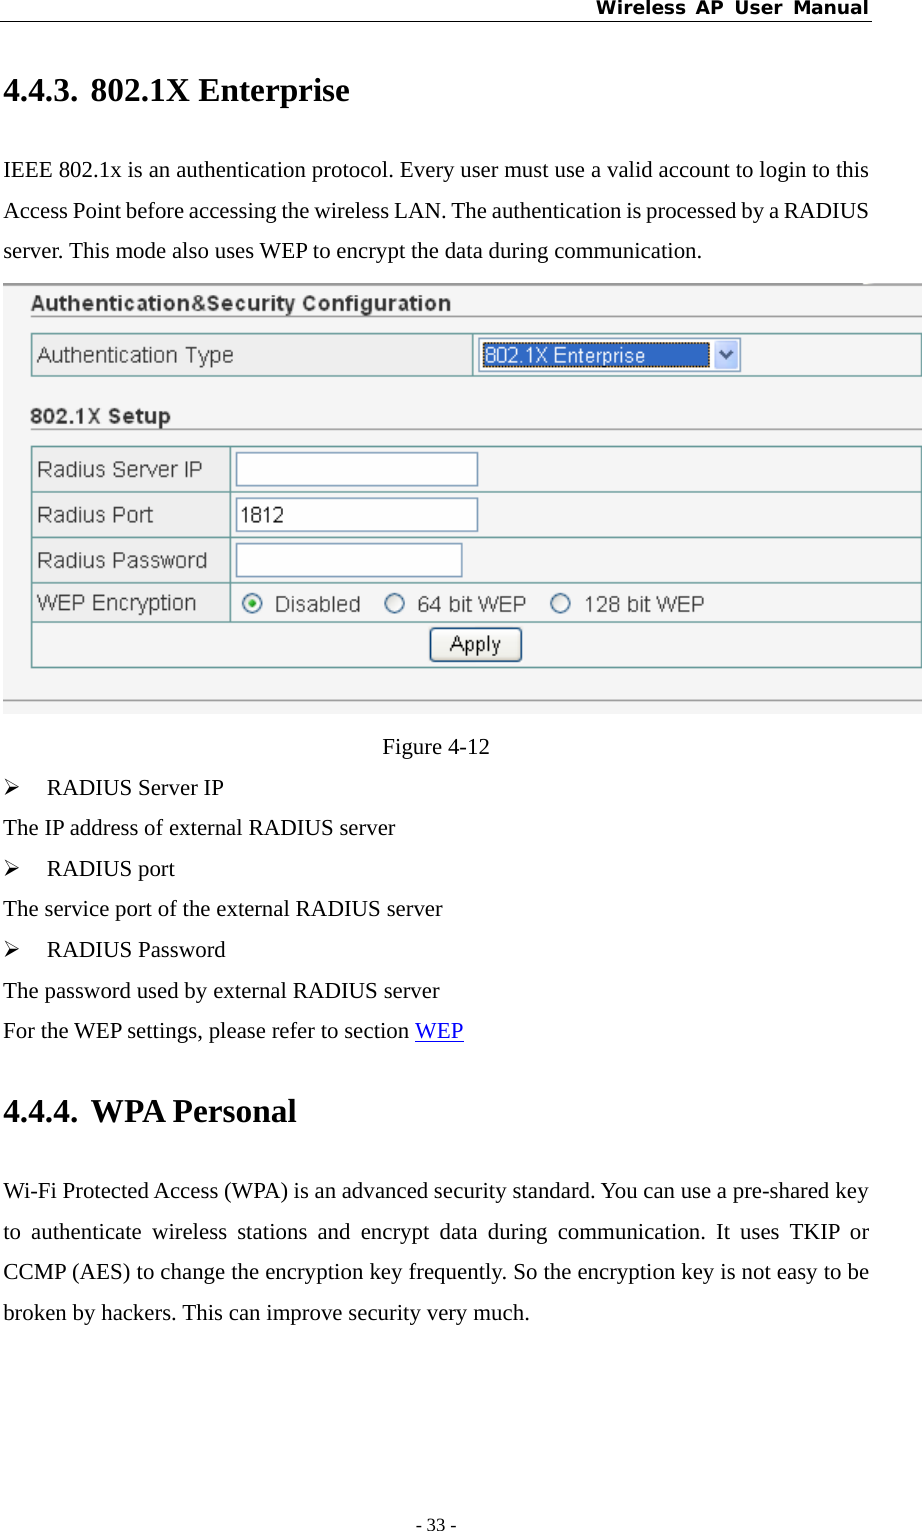 Wireless AP User Manual - 33 -  4.4.3. 802.1X Enterprise IEEE 802.1x is an authentication protocol. Every user must use a valid account to login to this Access Point before accessing the wireless LAN. The authentication is processed by a RADIUS server. This mode also uses WEP to encrypt the data during communication.  Figure 4-12 ¾ RADIUS Server IP The IP address of external RADIUS server ¾ RADIUS port The service port of the external RADIUS server ¾ RADIUS Password The password used by external RADIUS server For the WEP settings, please refer to section WEP 4.4.4. WPA Personal Wi-Fi Protected Access (WPA) is an advanced security standard. You can use a pre-shared key to authenticate wireless stations and encrypt data during communication. It uses TKIP or CCMP (AES) to change the encryption key frequently. So the encryption key is not easy to be broken by hackers. This can improve security very much. 